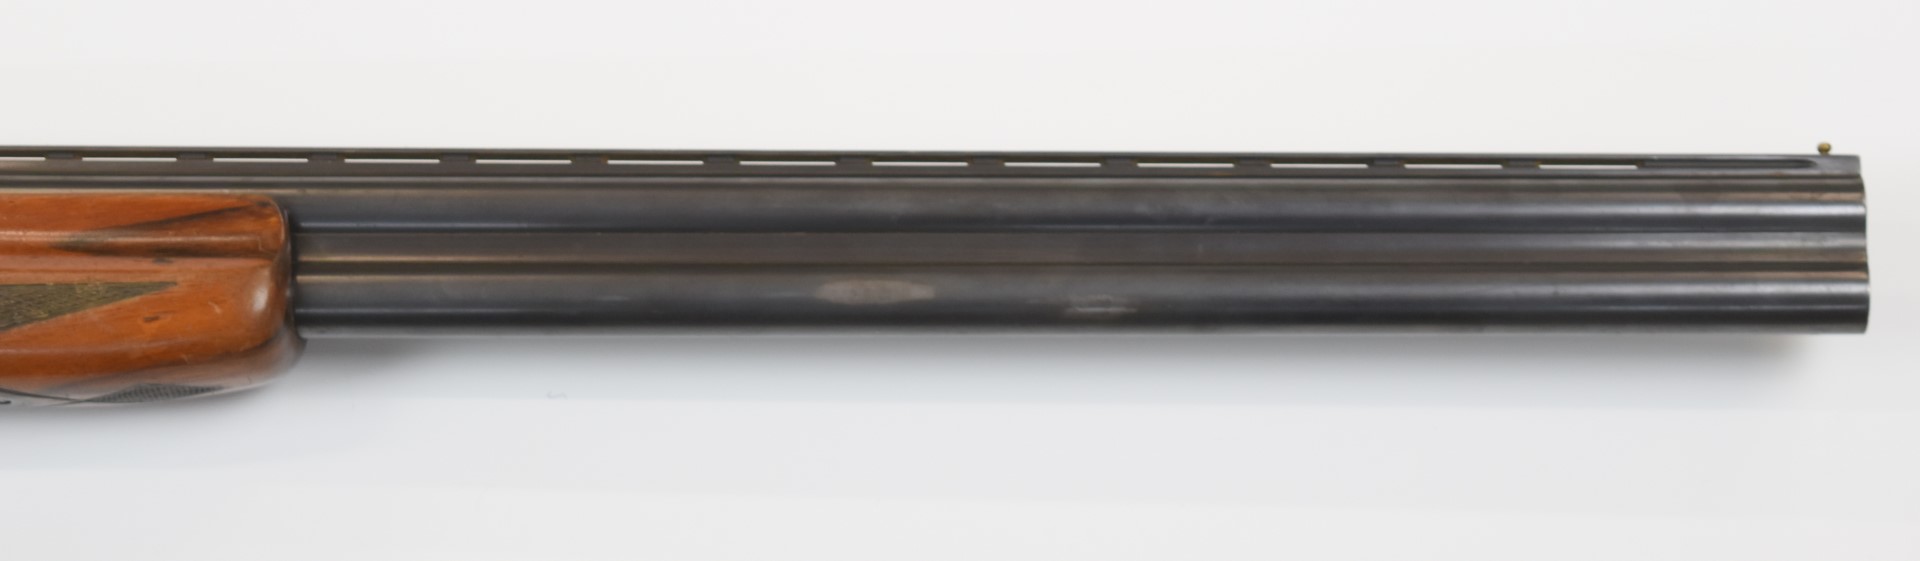 Winchester 101 12 bore over and under ejector shotgun with engraved lock, trigger guard, thumb - Image 5 of 10